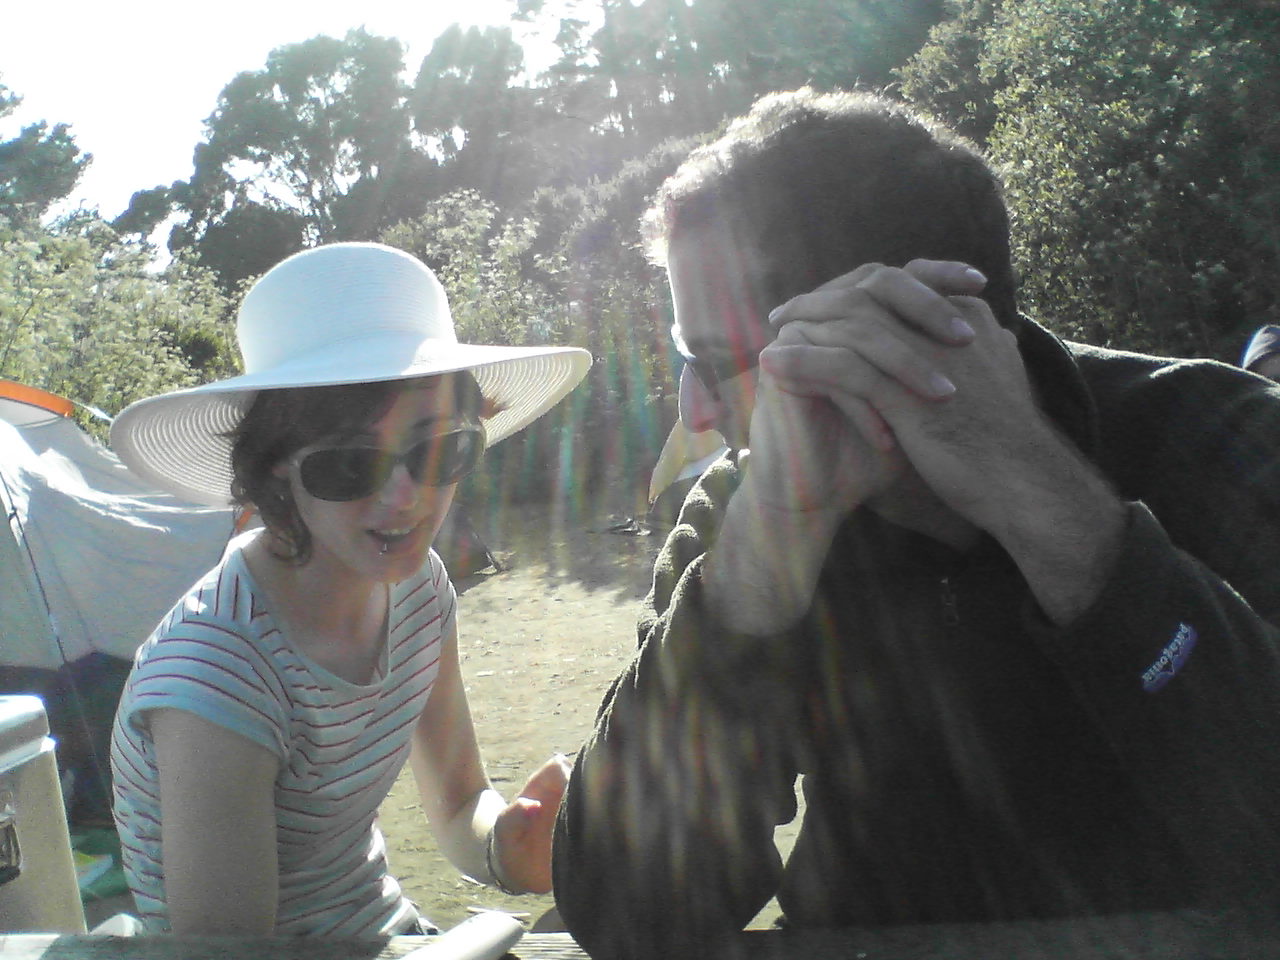 a woman is covering her eyes and a man in a hat